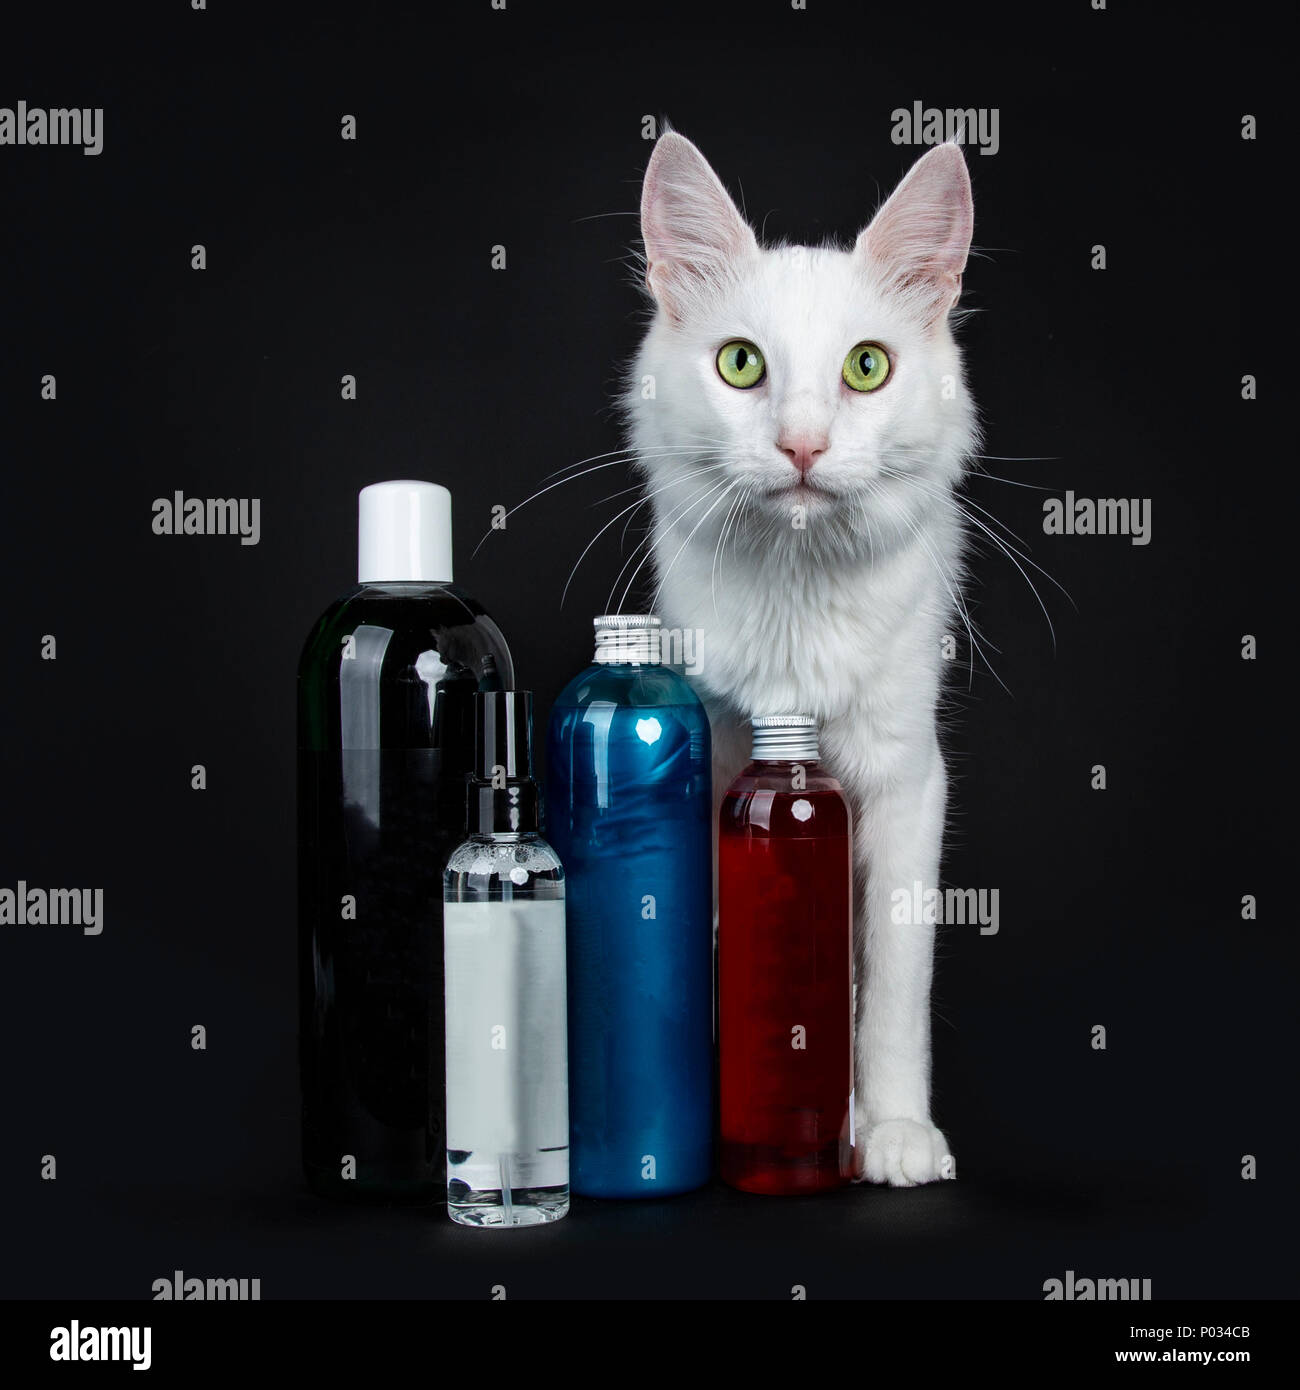 Solid white green eyed Turkish Angora cat standing behind colorful see through bottles isolated on black looking at camera Stock Photo